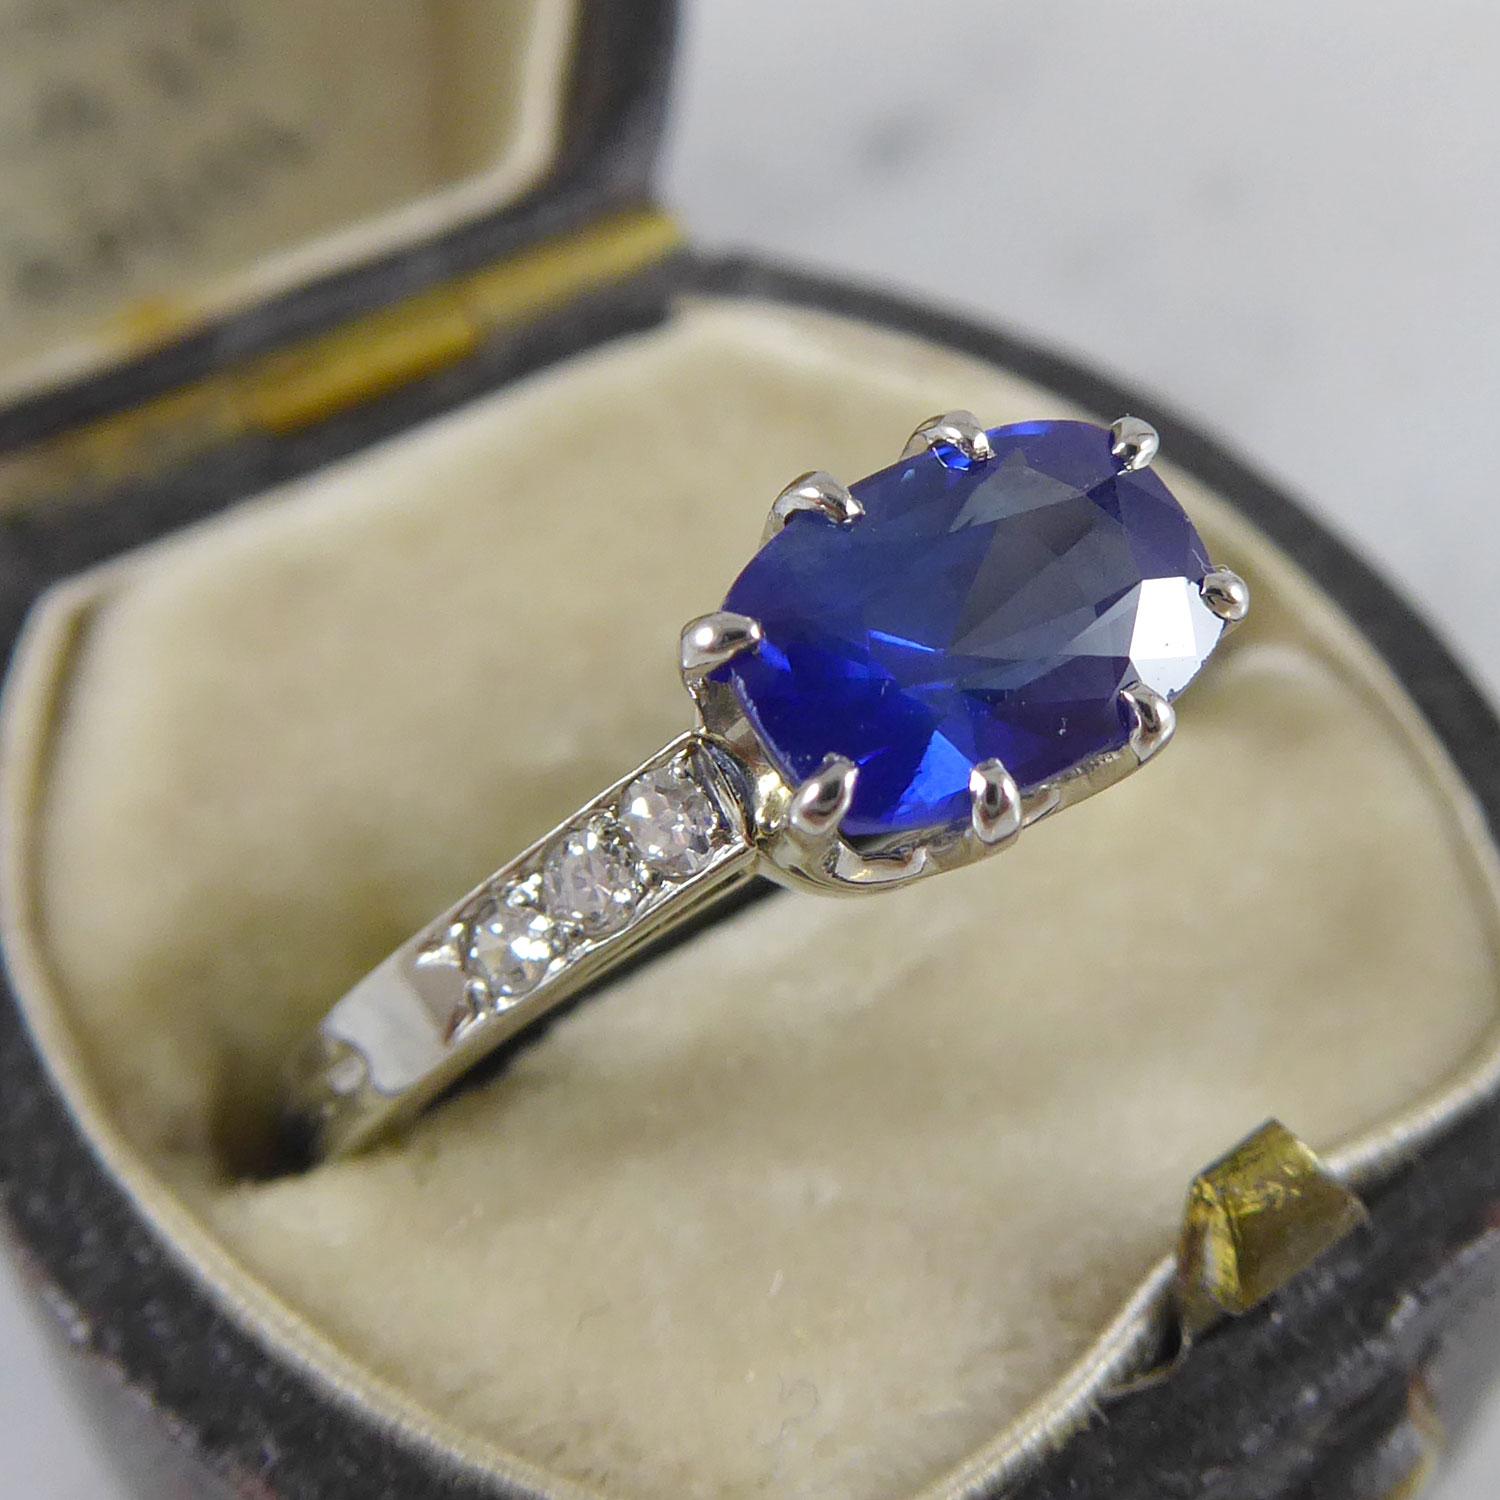 Cushion Cut Contemporary 1.41 Carat Sapphire Ring with Diamond Set Shoulders, French